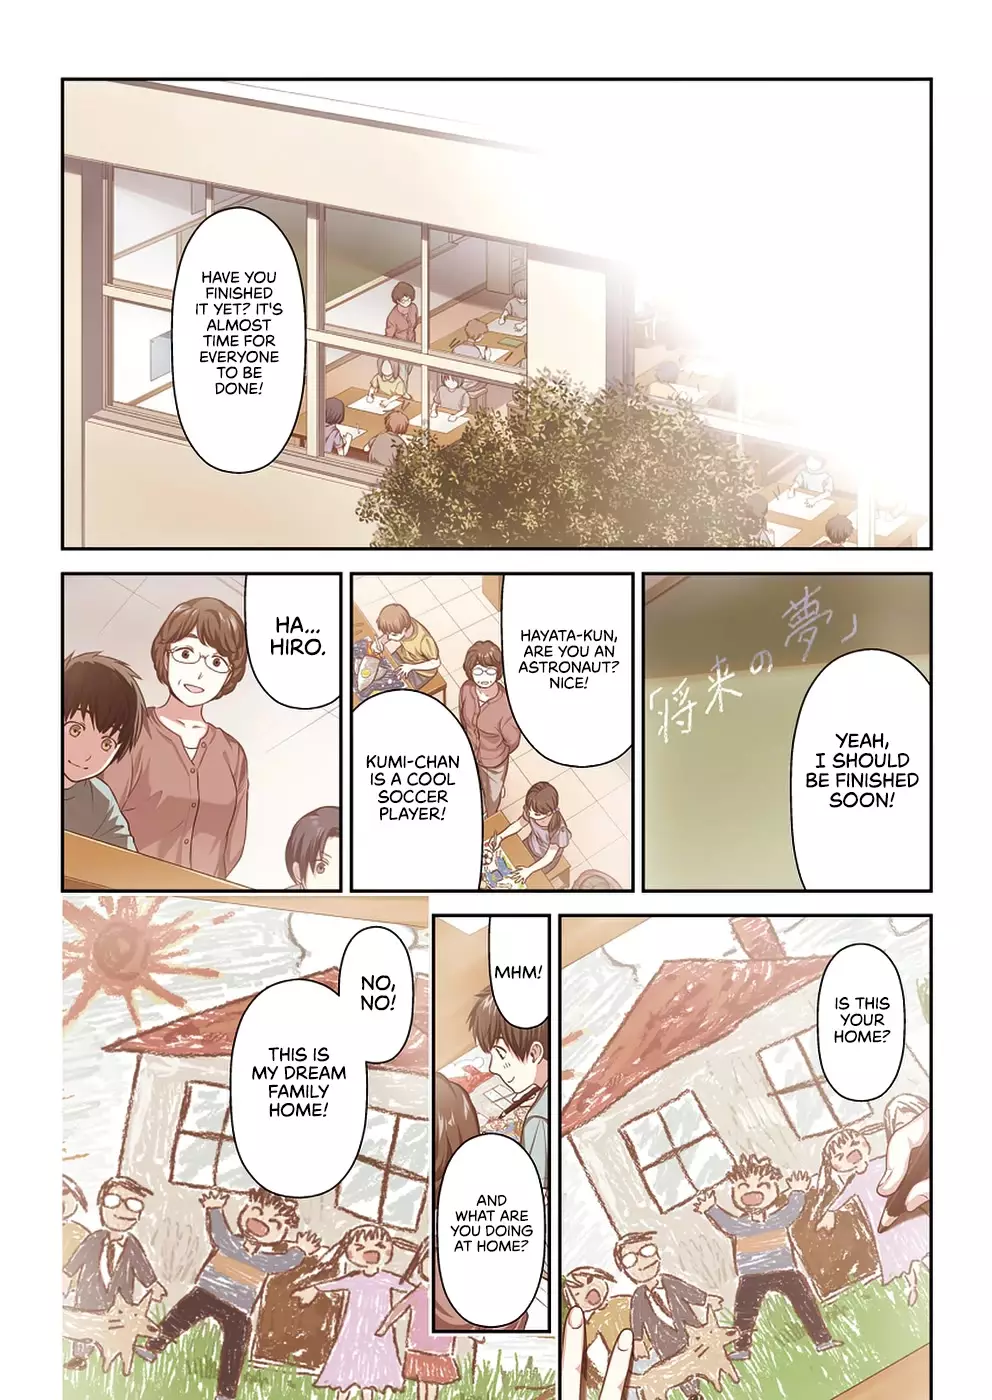 Can I Live With You? - 1 page 4-3ad3e5e5